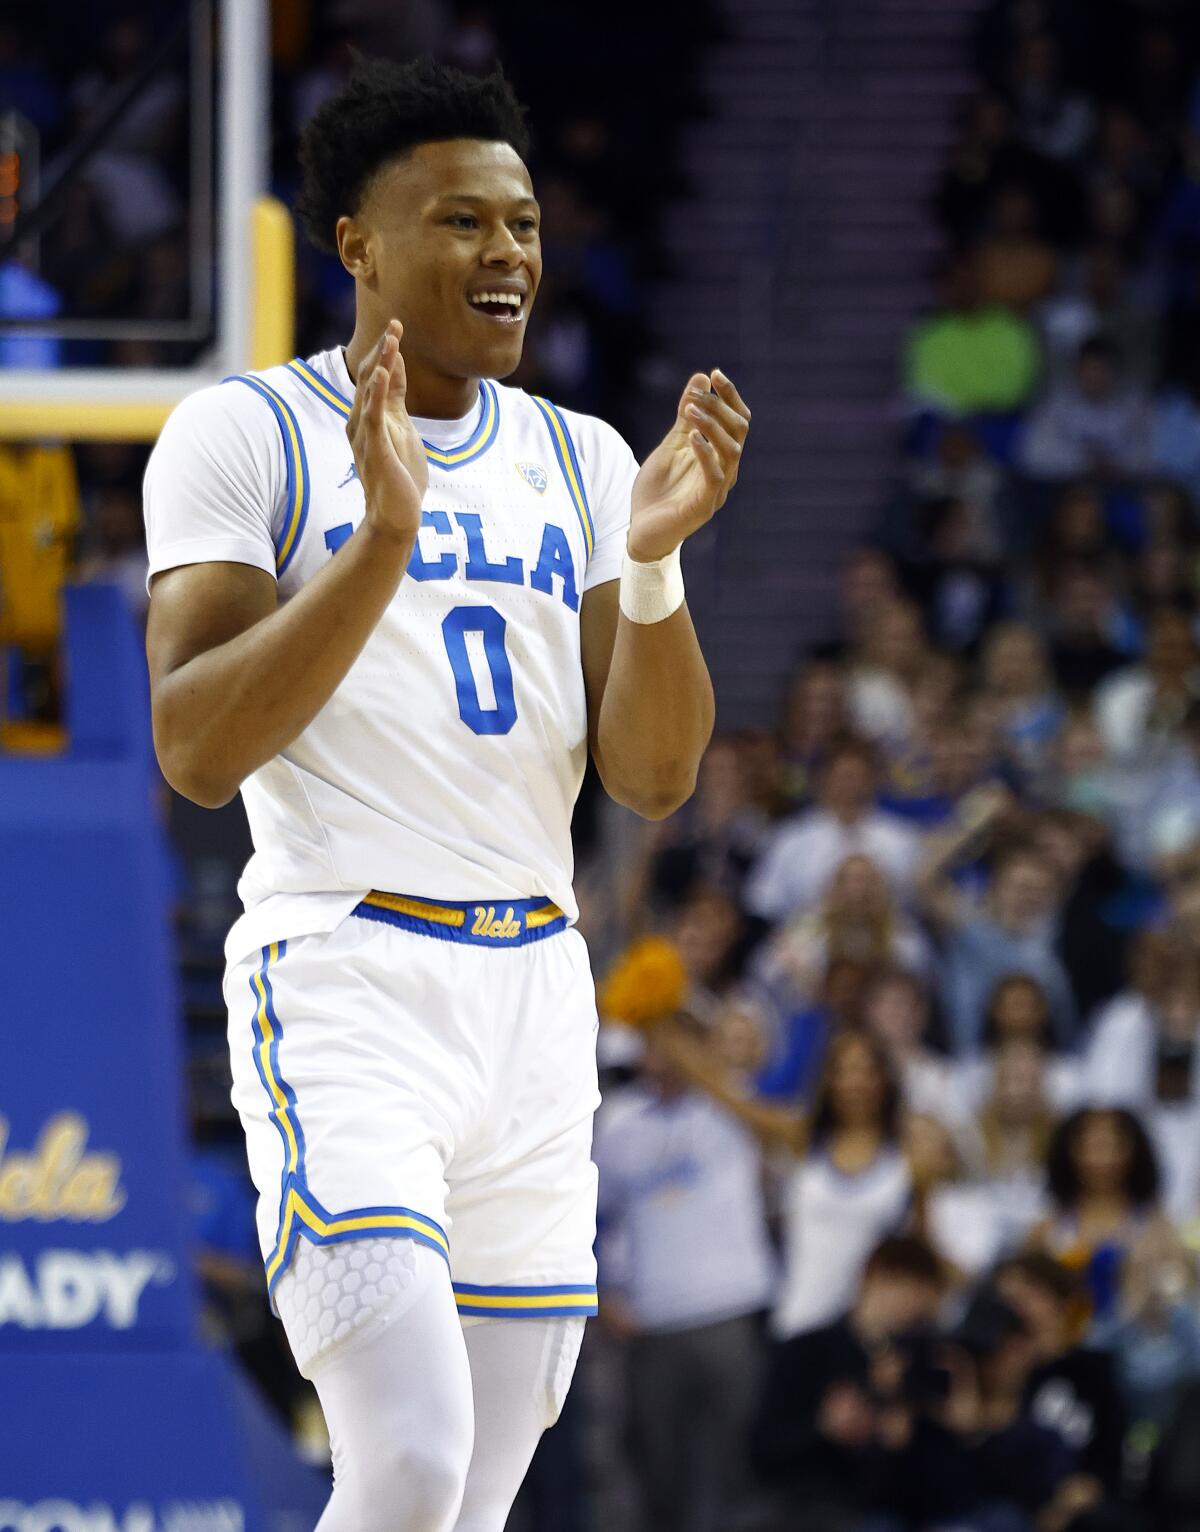 The Bruins' Jaylen Clark reacts against Colorado in the first half Jan. 14, 2023.